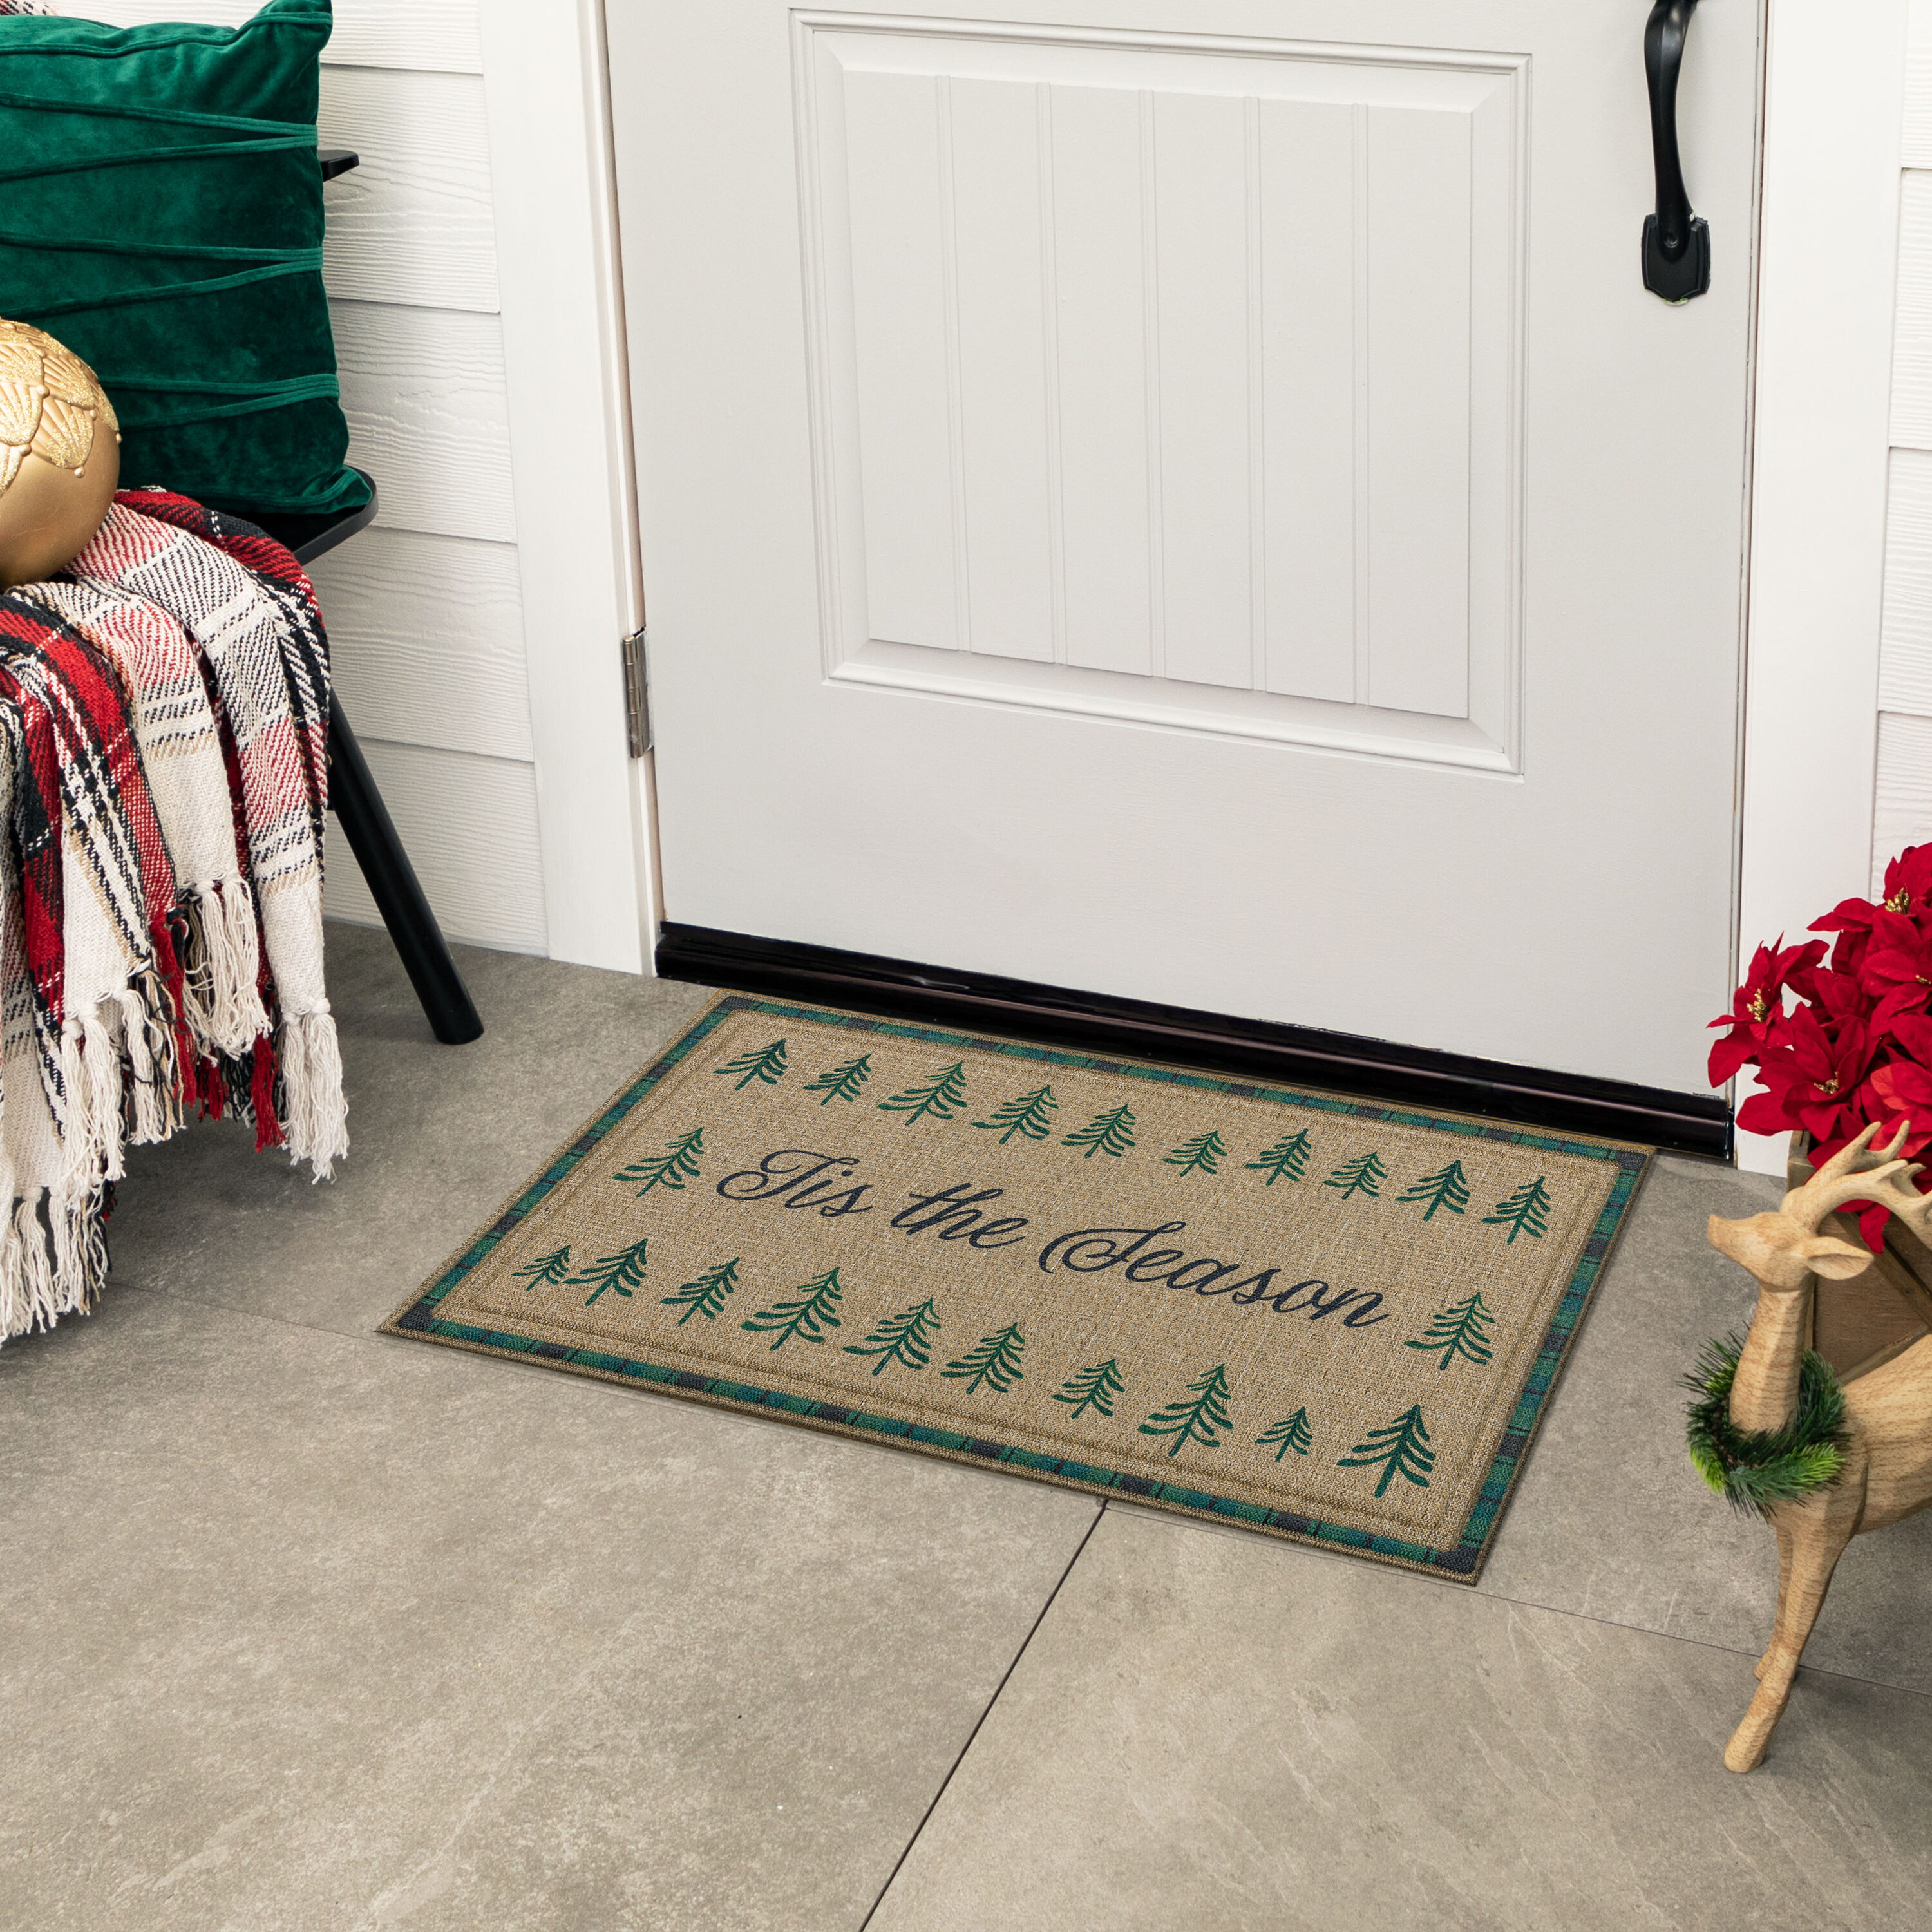 3 of the best Commercial Entrance Mats for wet weather